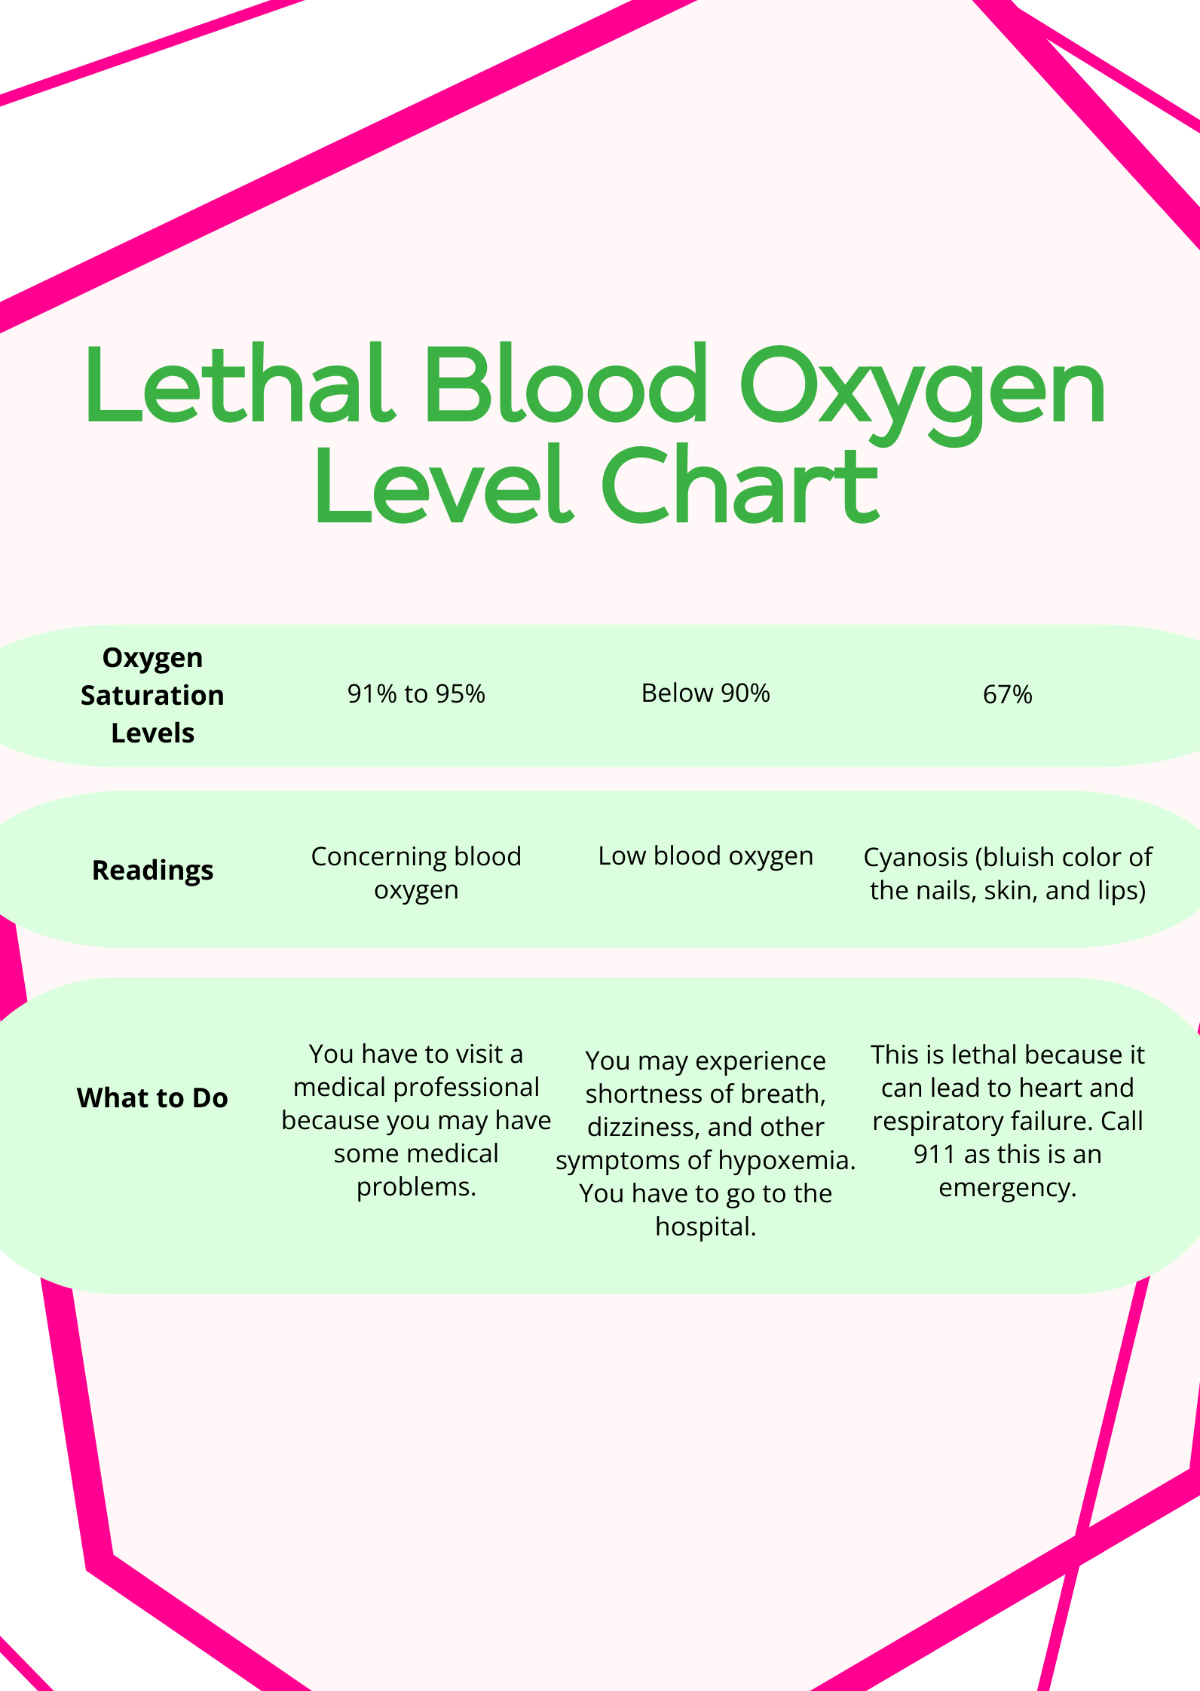 Lethal Blood Oxygen Level Chart Template